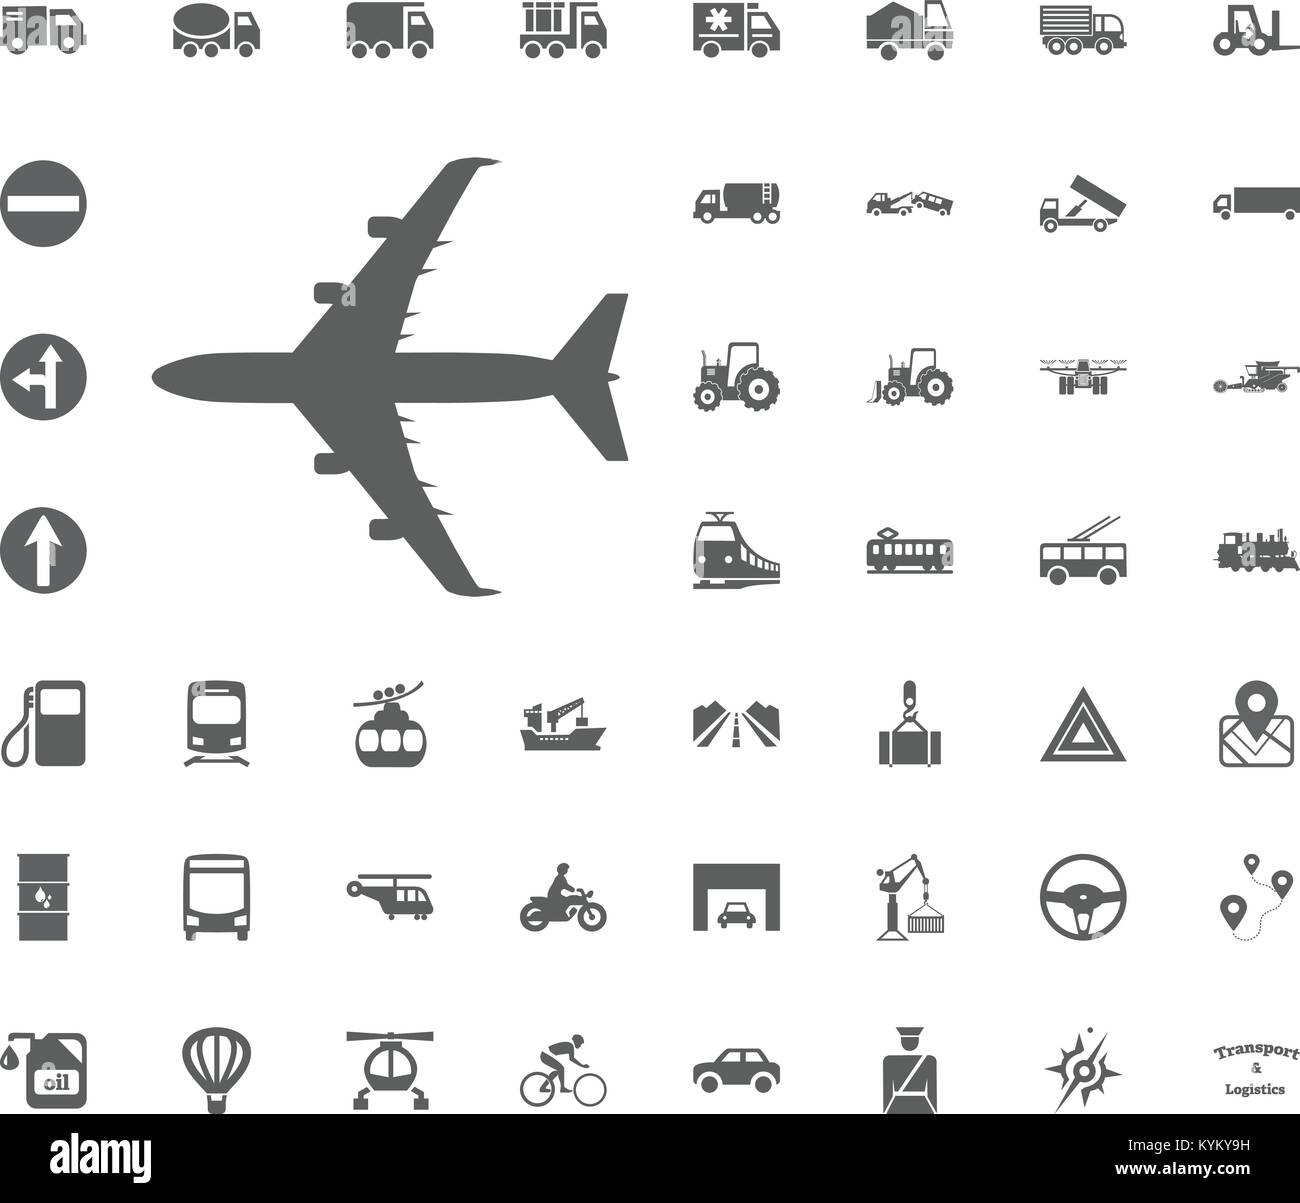 Aircraft icon. Airplane icon. Transport and Logistics set icons. Transportation set icons. Stock Vector